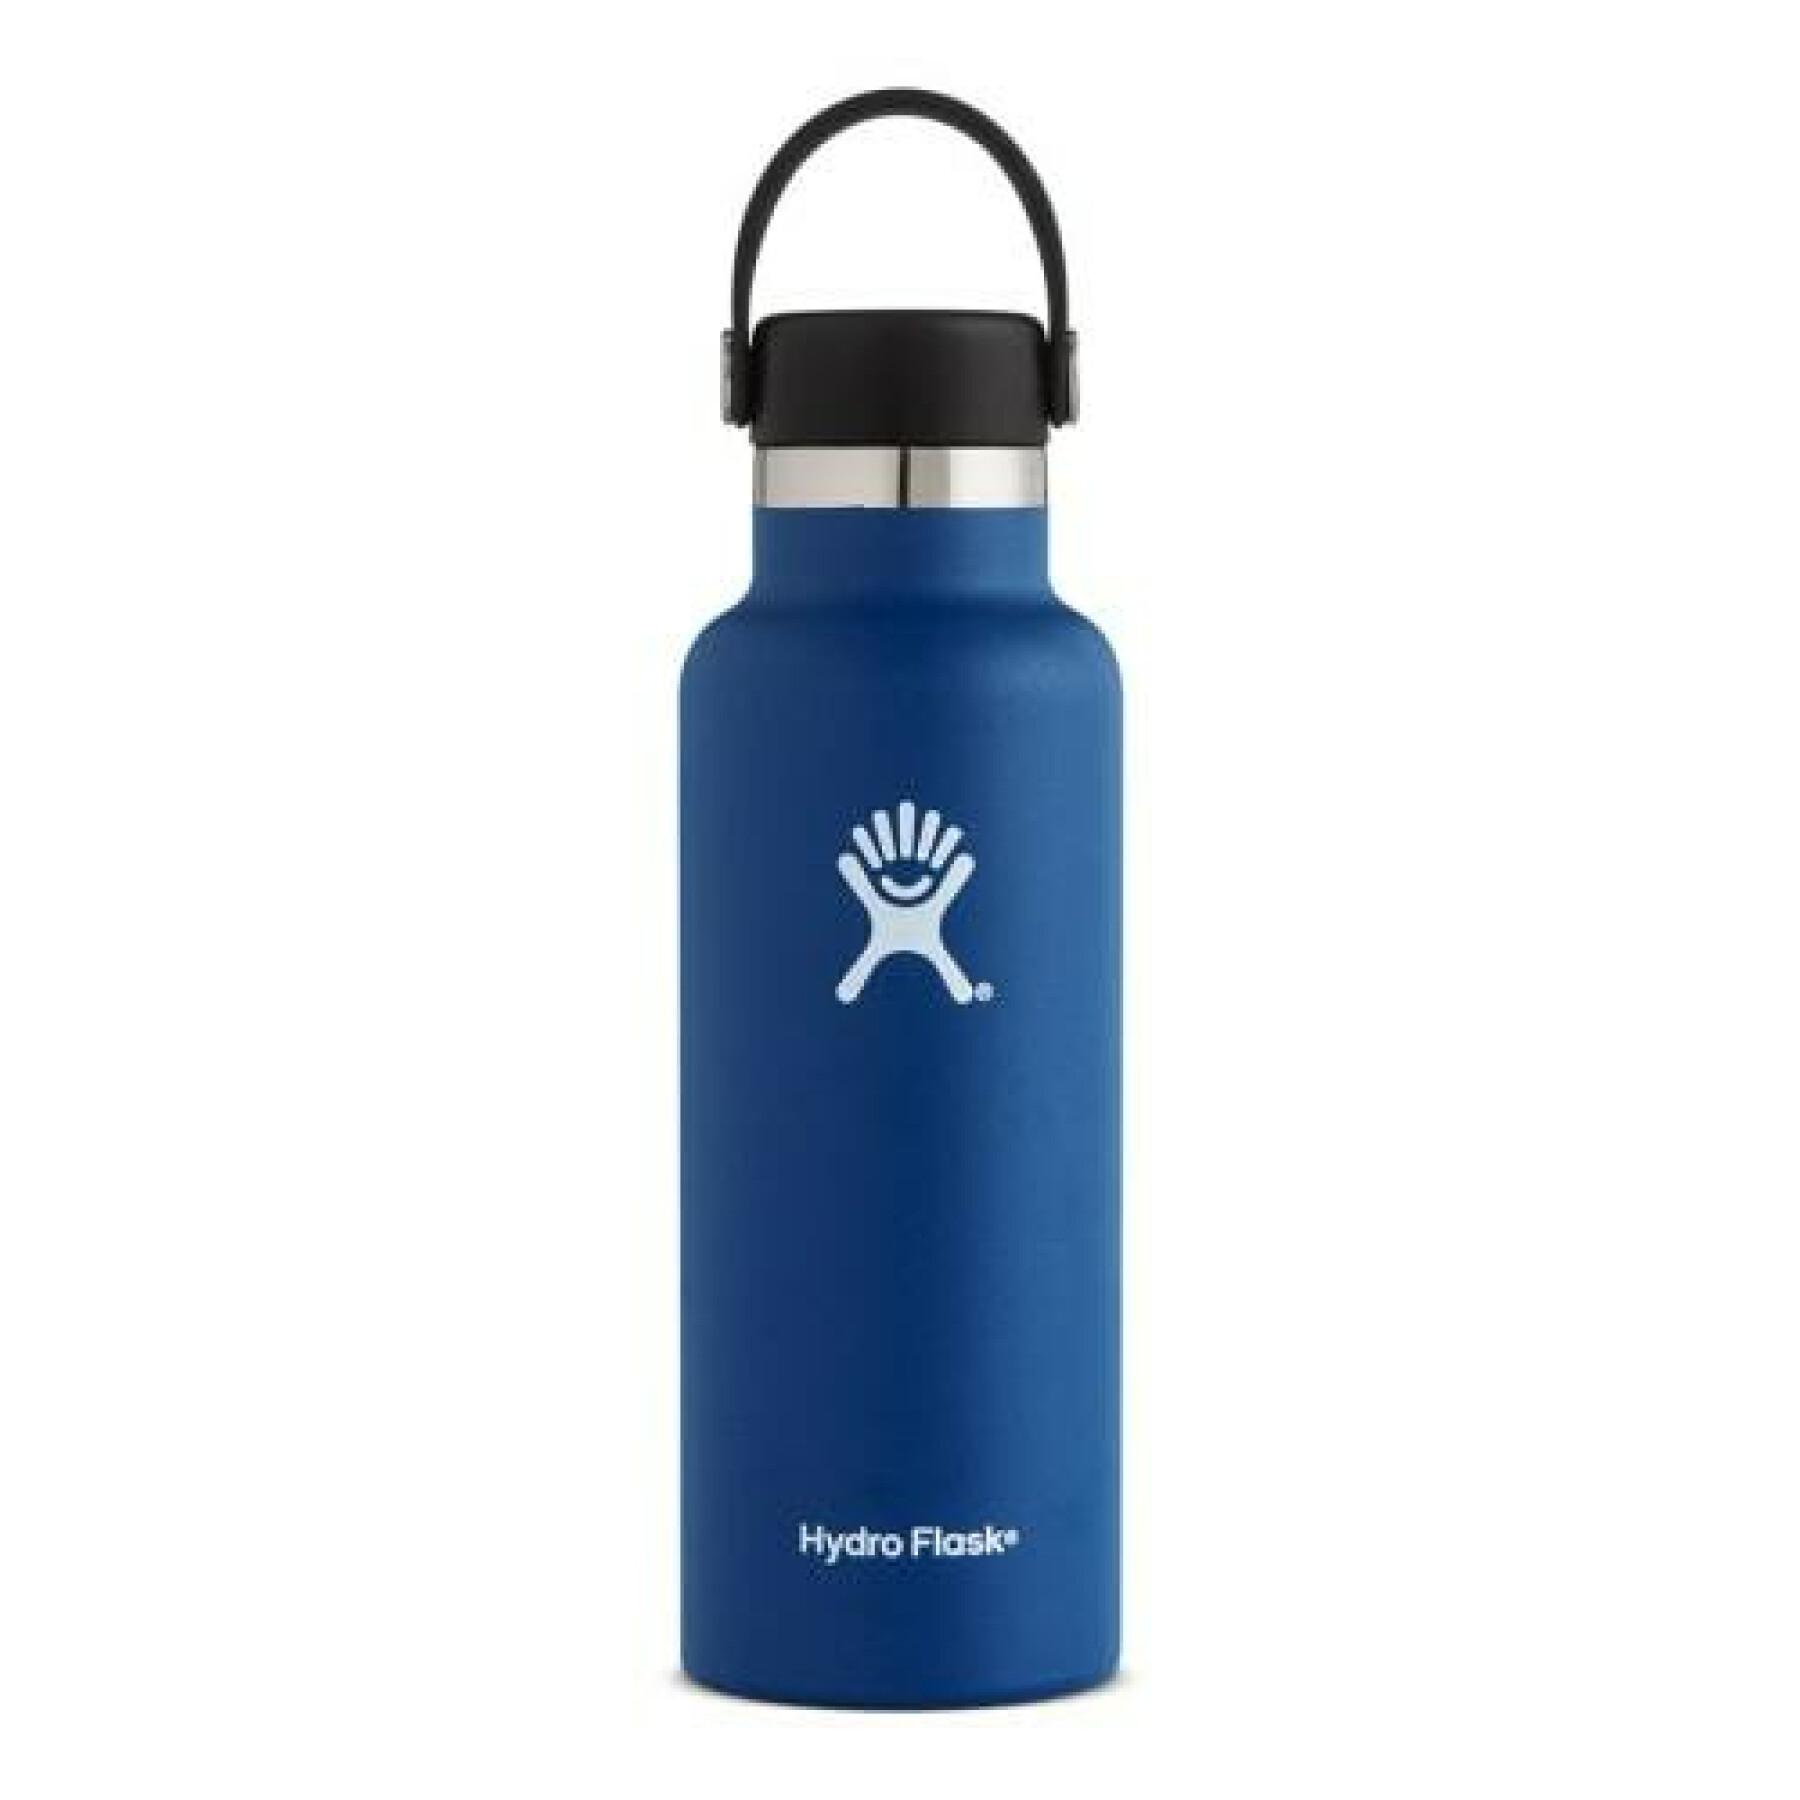 Thermos standard Hydro Flask with standard mouth flex cap 18 oz